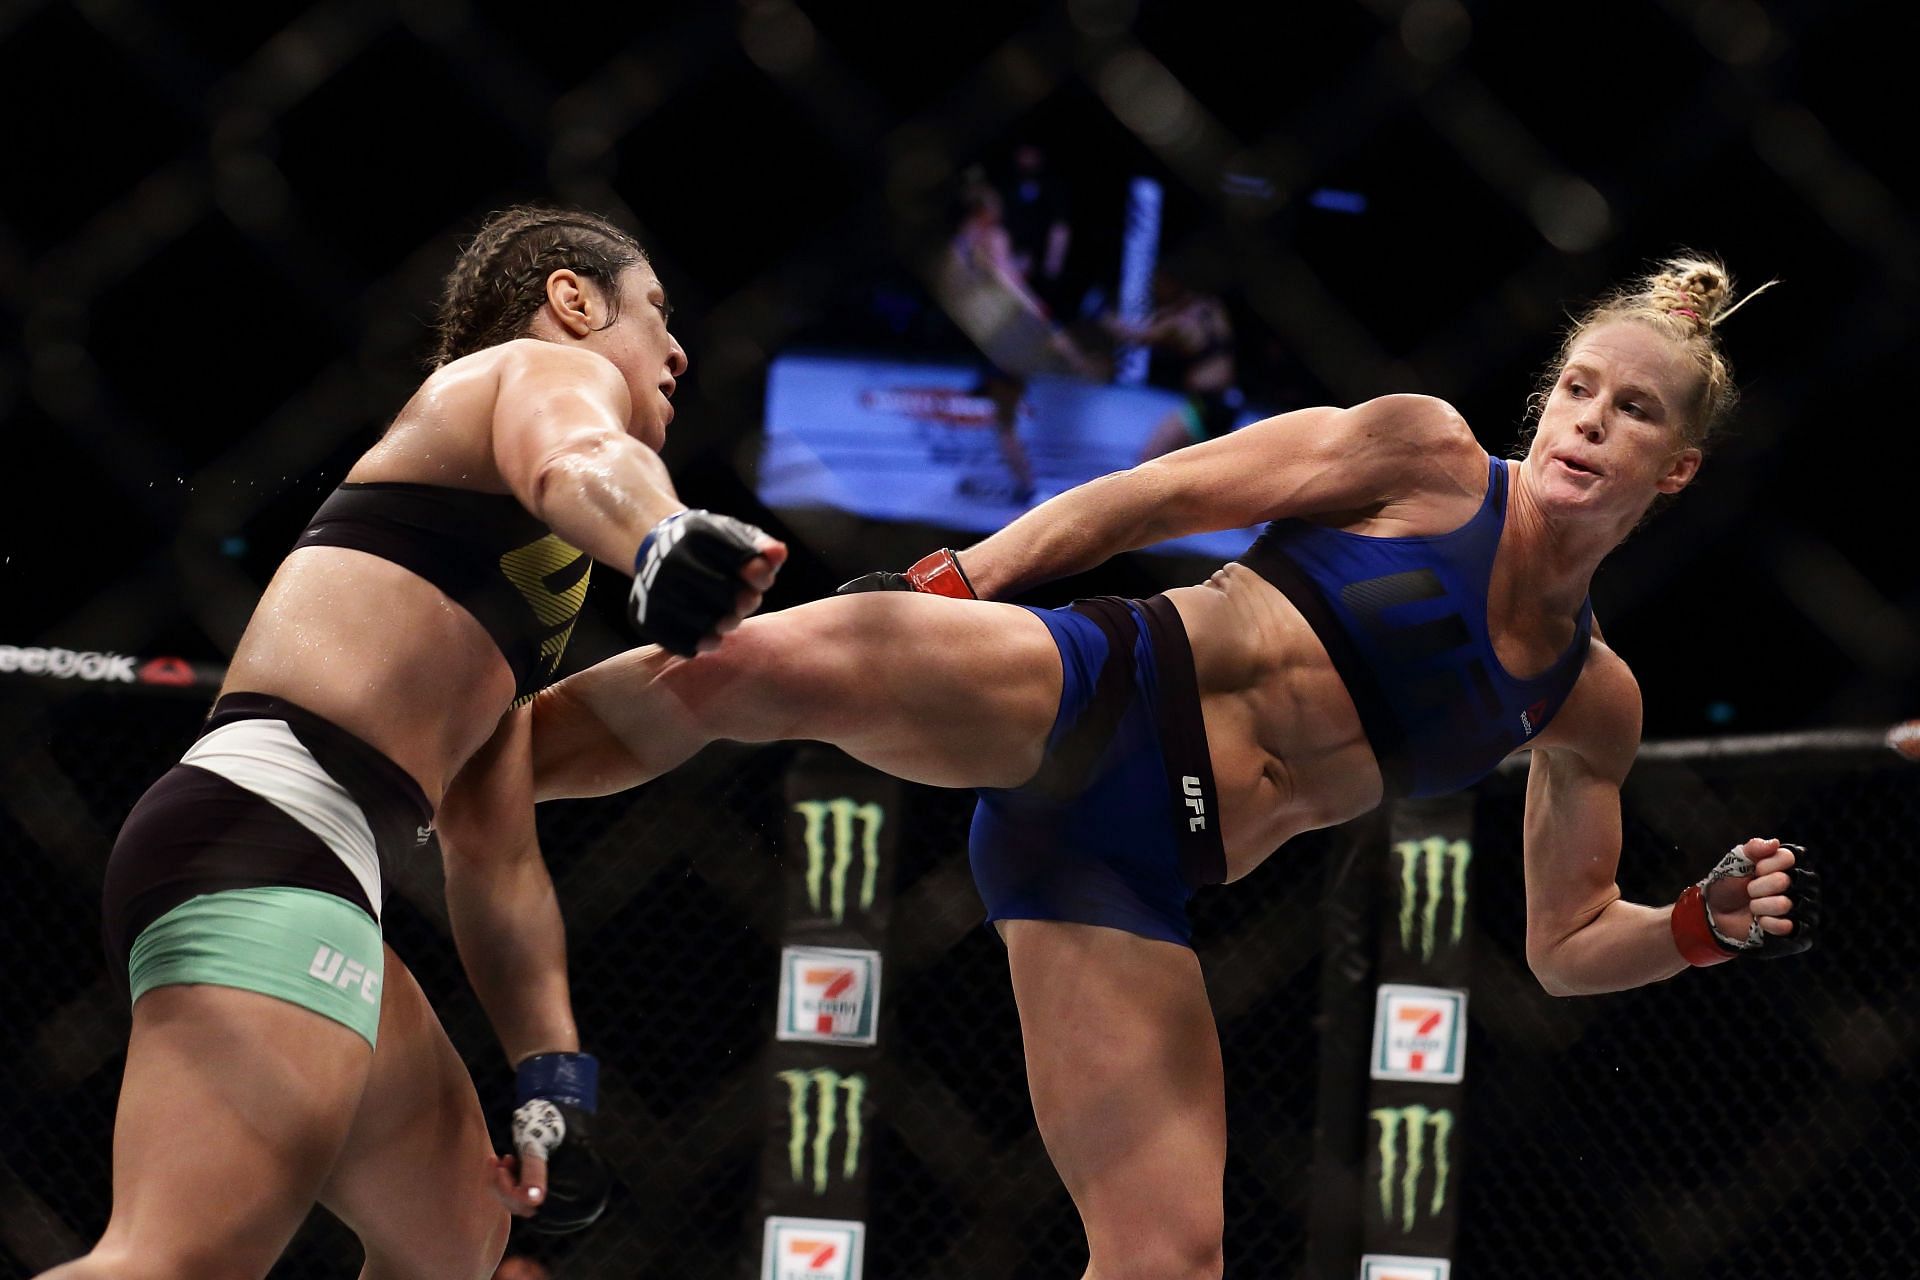 Holm returned to winning ways against Correia at UFC Fight Night 111.